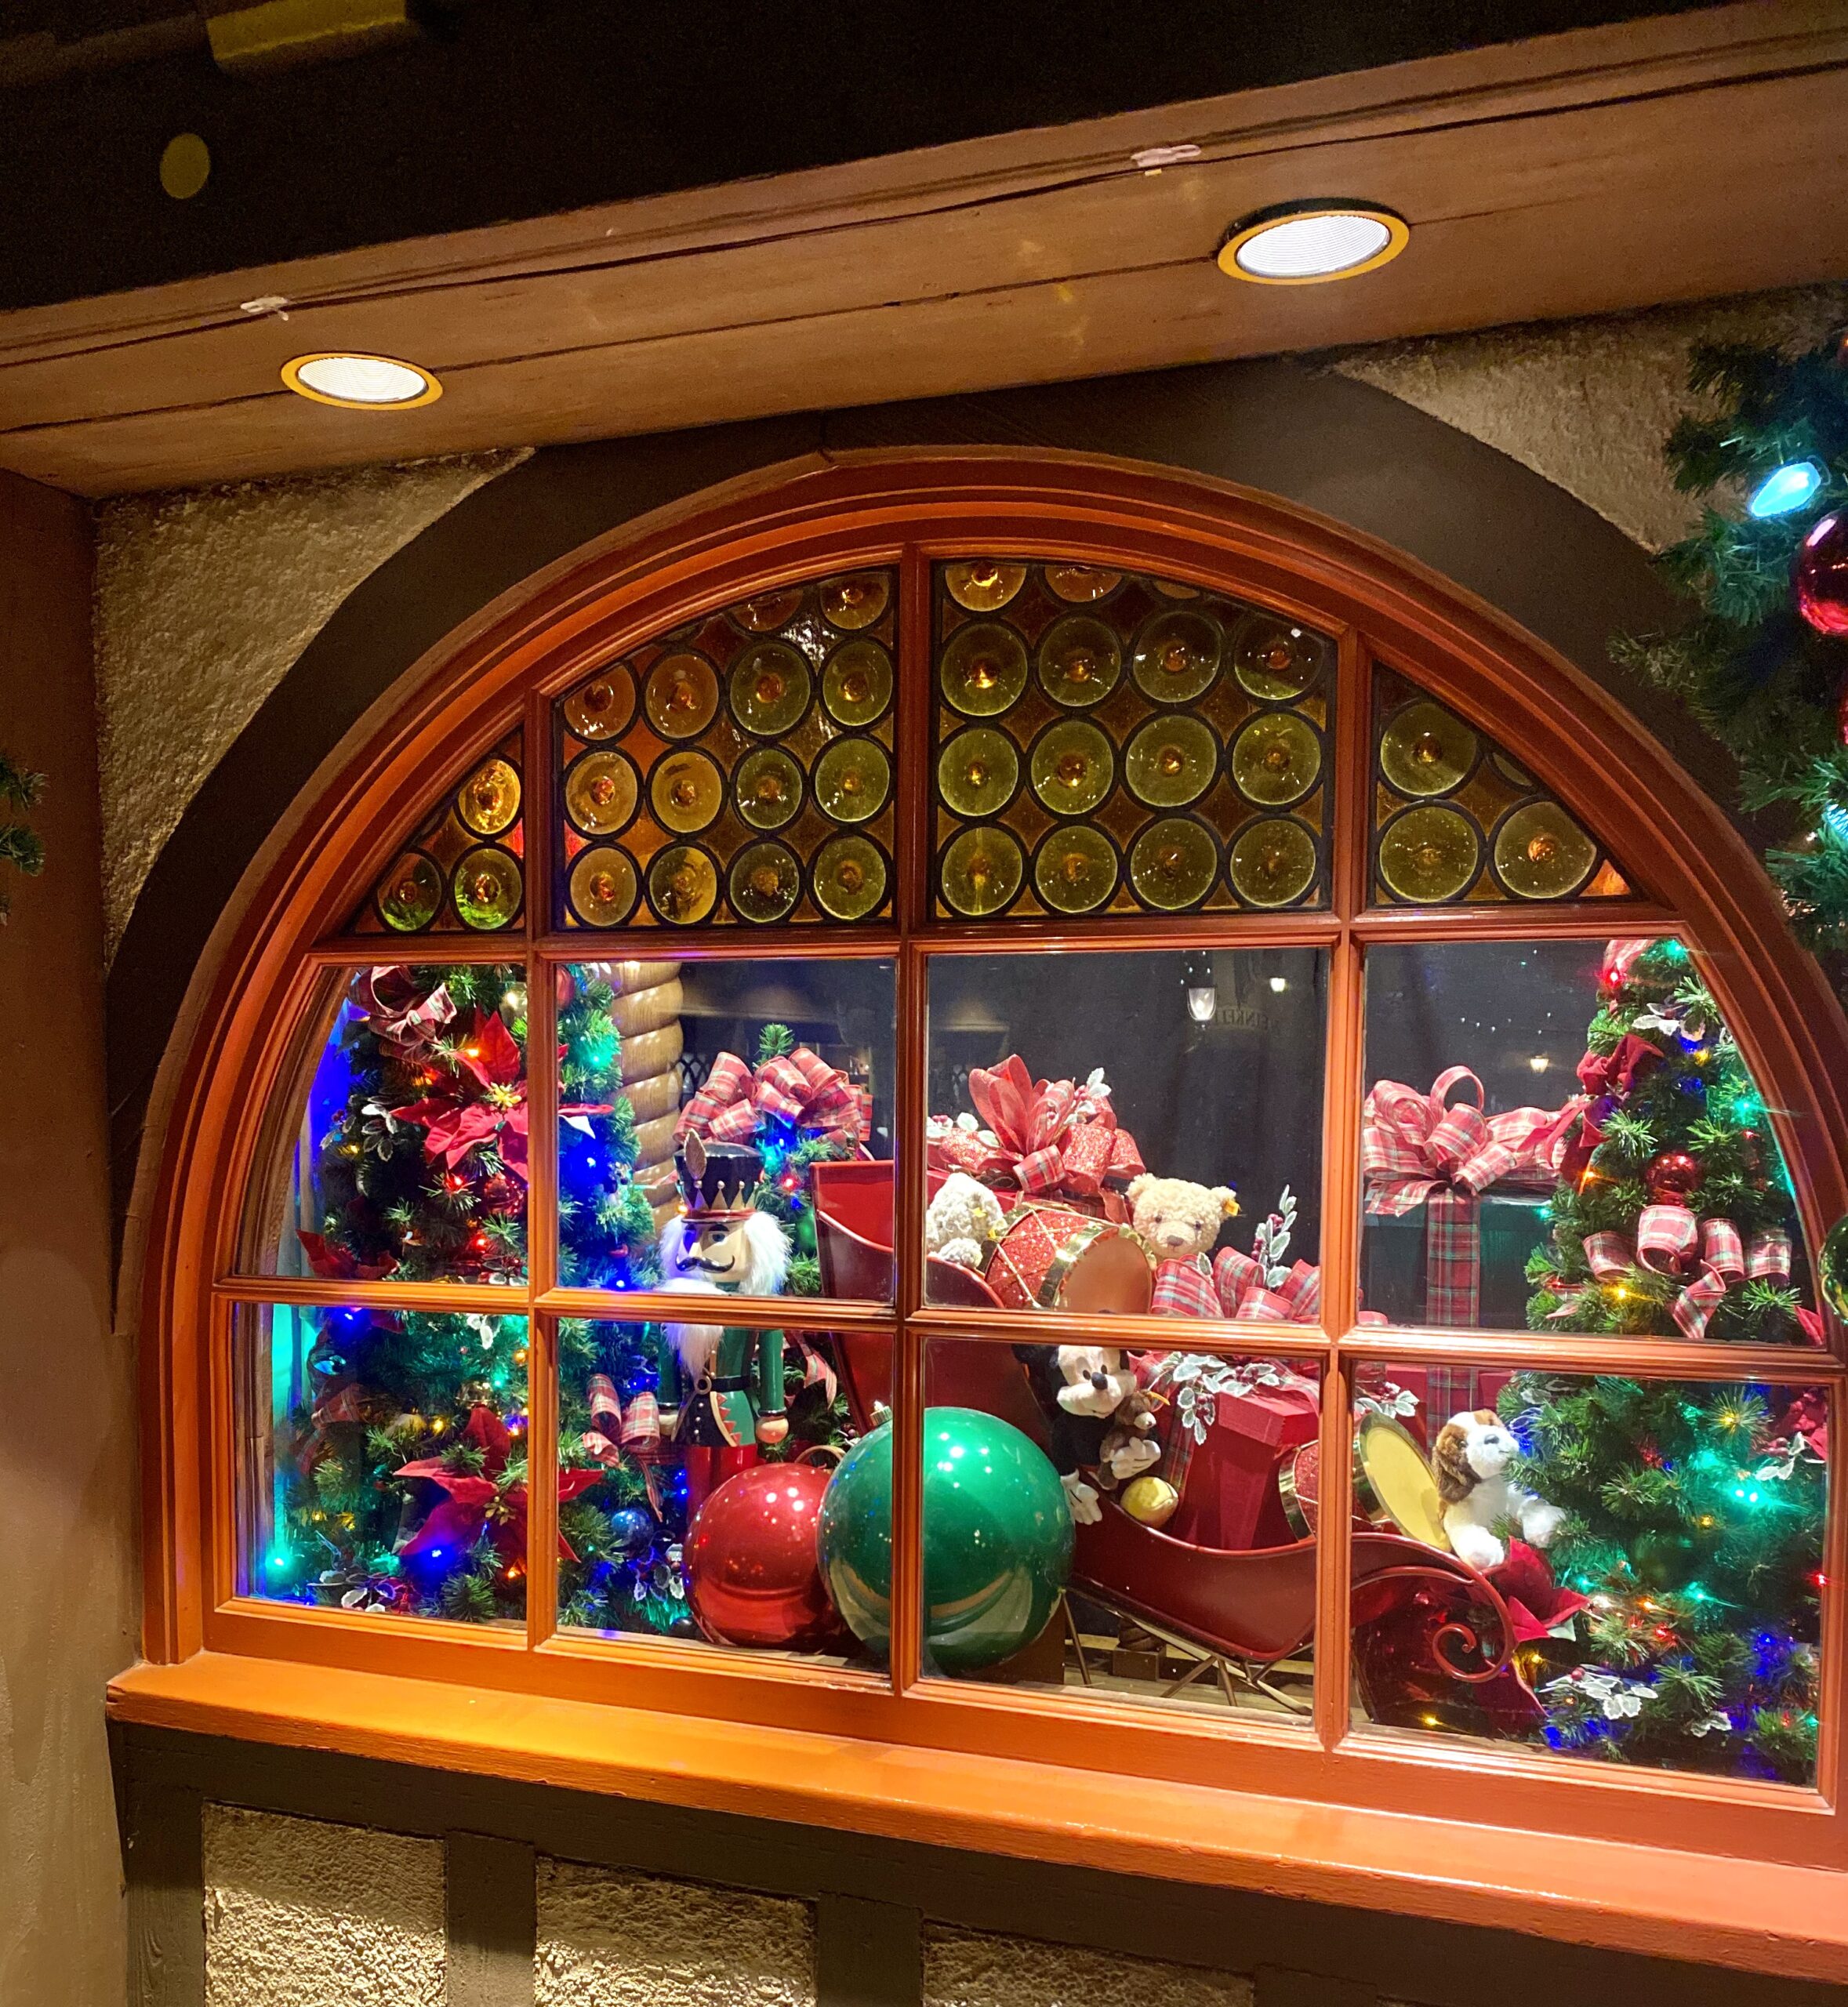 Epcot’s Festival of the Holidays tore windows